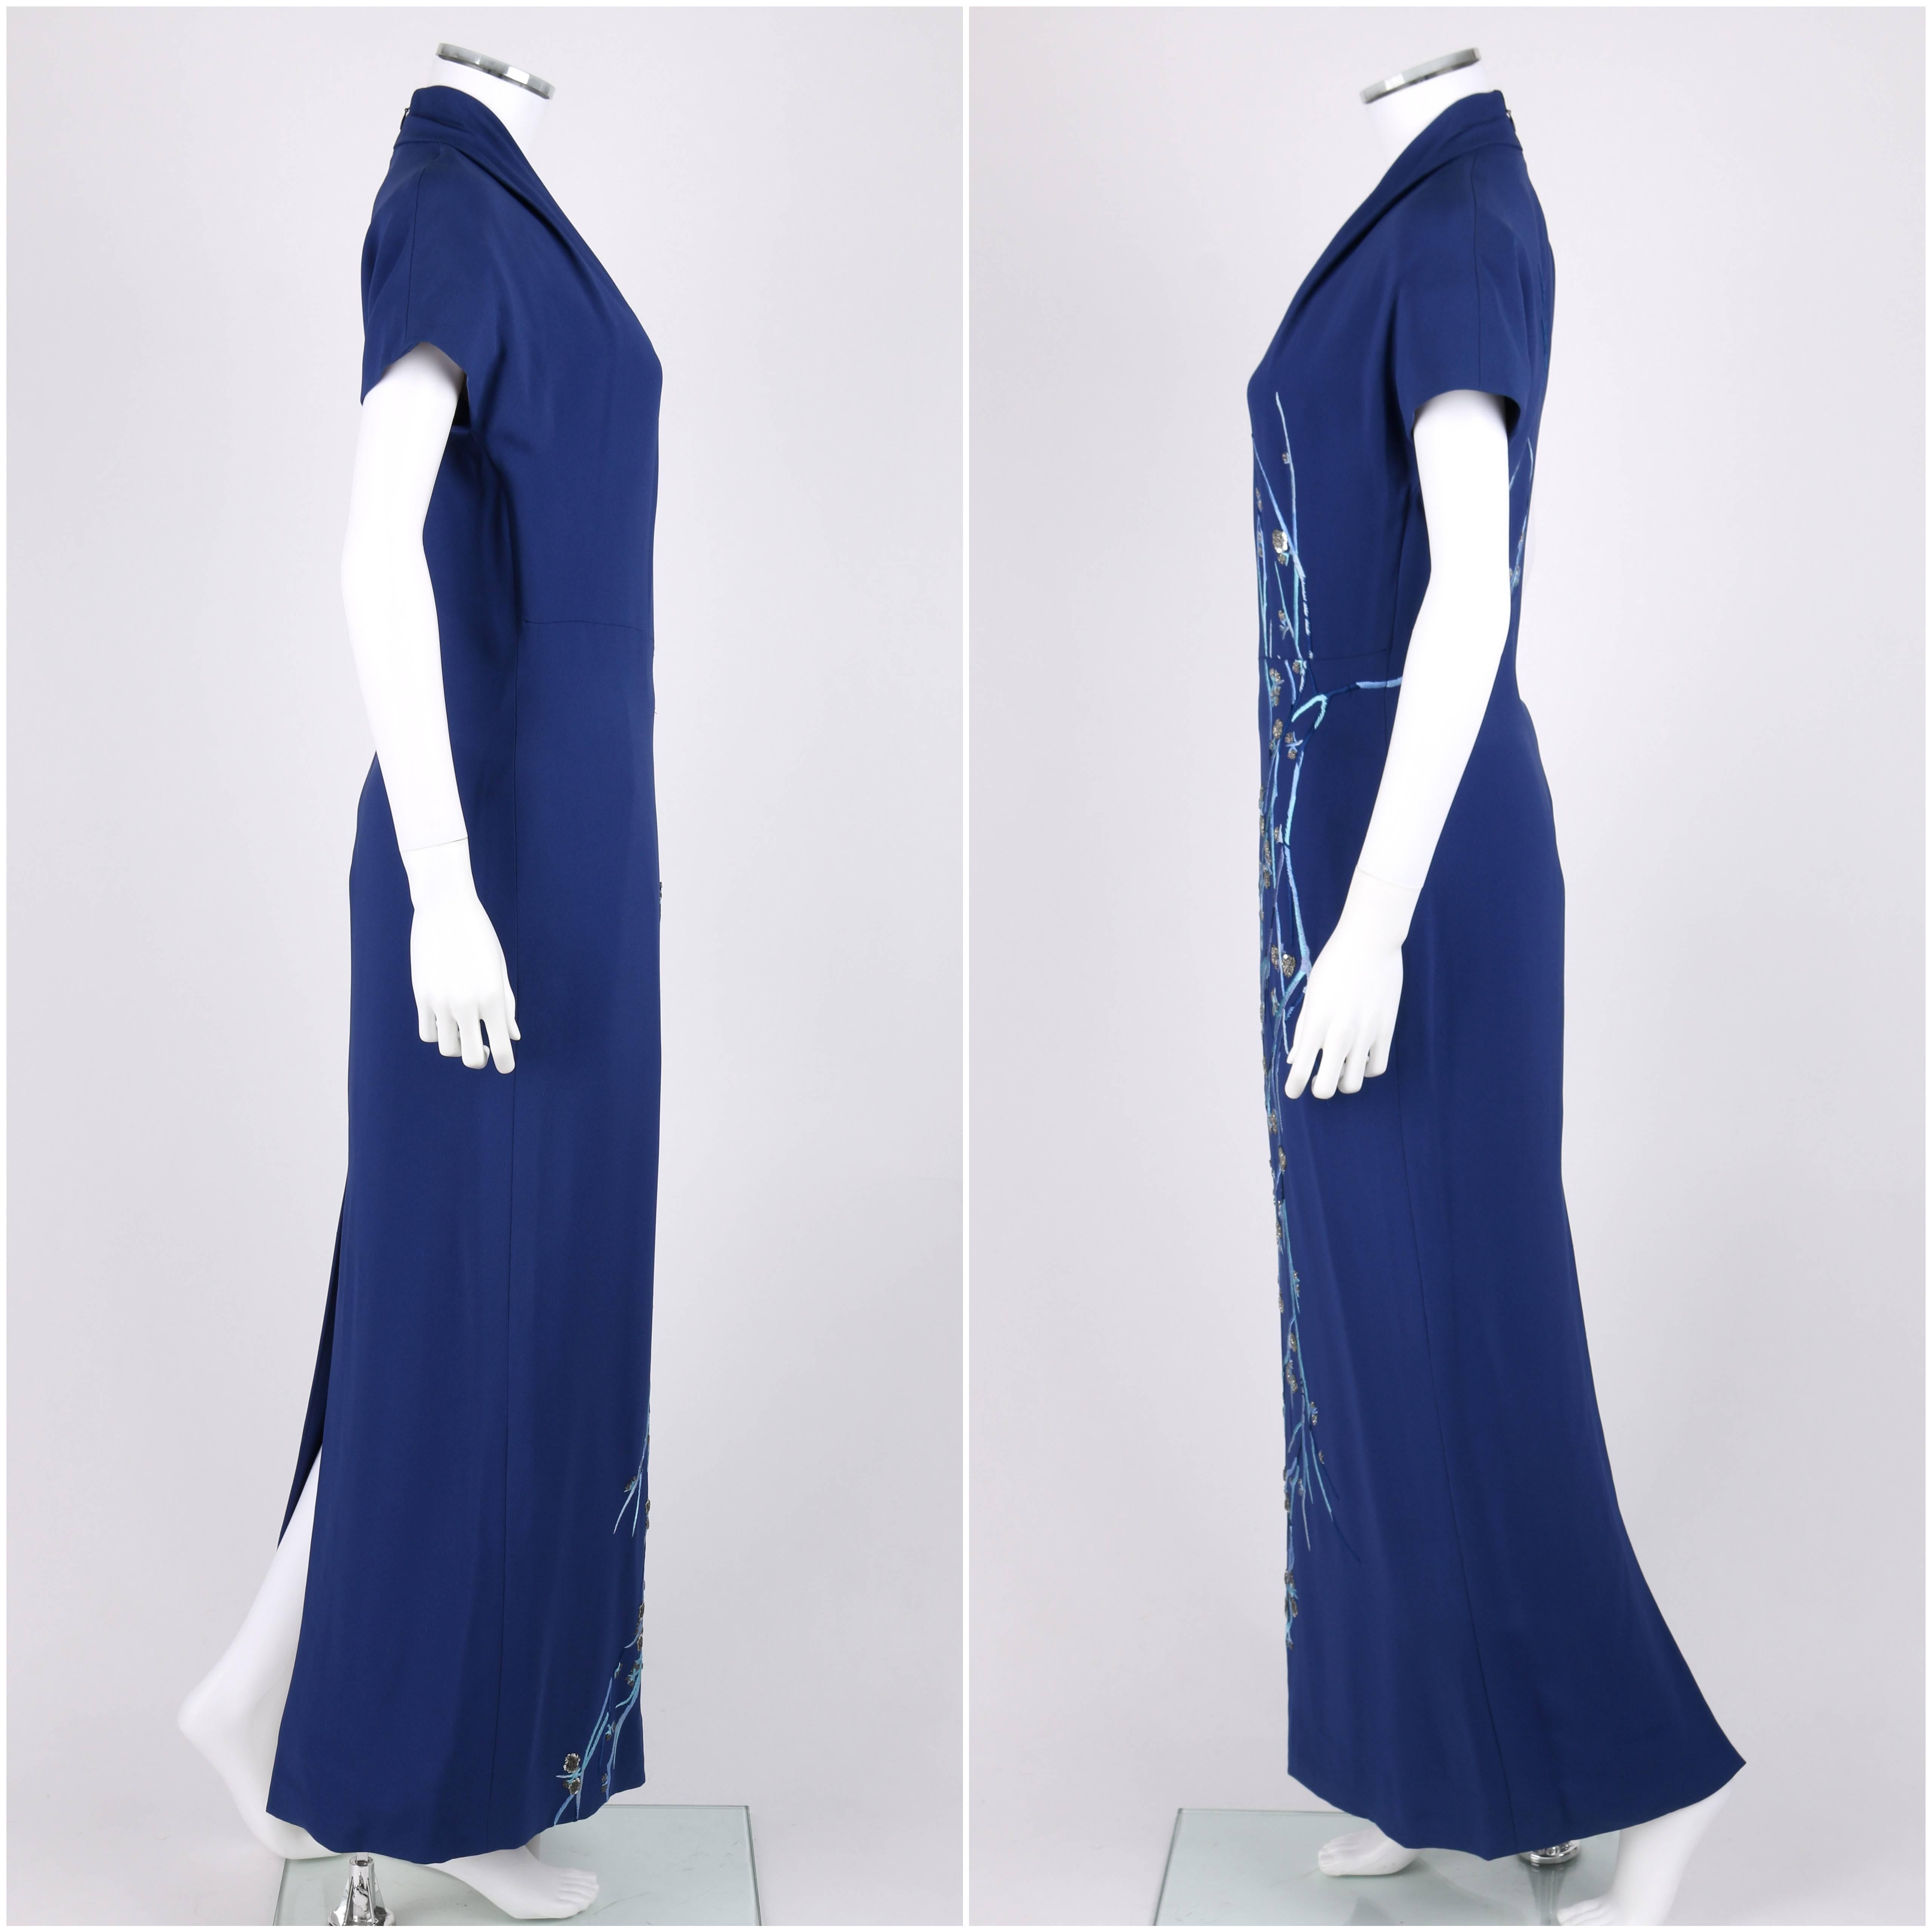 Givenchy Couture A/W 1998 royal blue evening dress designed by Alexander McQueen. Floral embroidery in shades of blue with clear glass beads and silver sequins. Short dolman sleeves. V-neckline. Center back invisible zipper with hook and eye